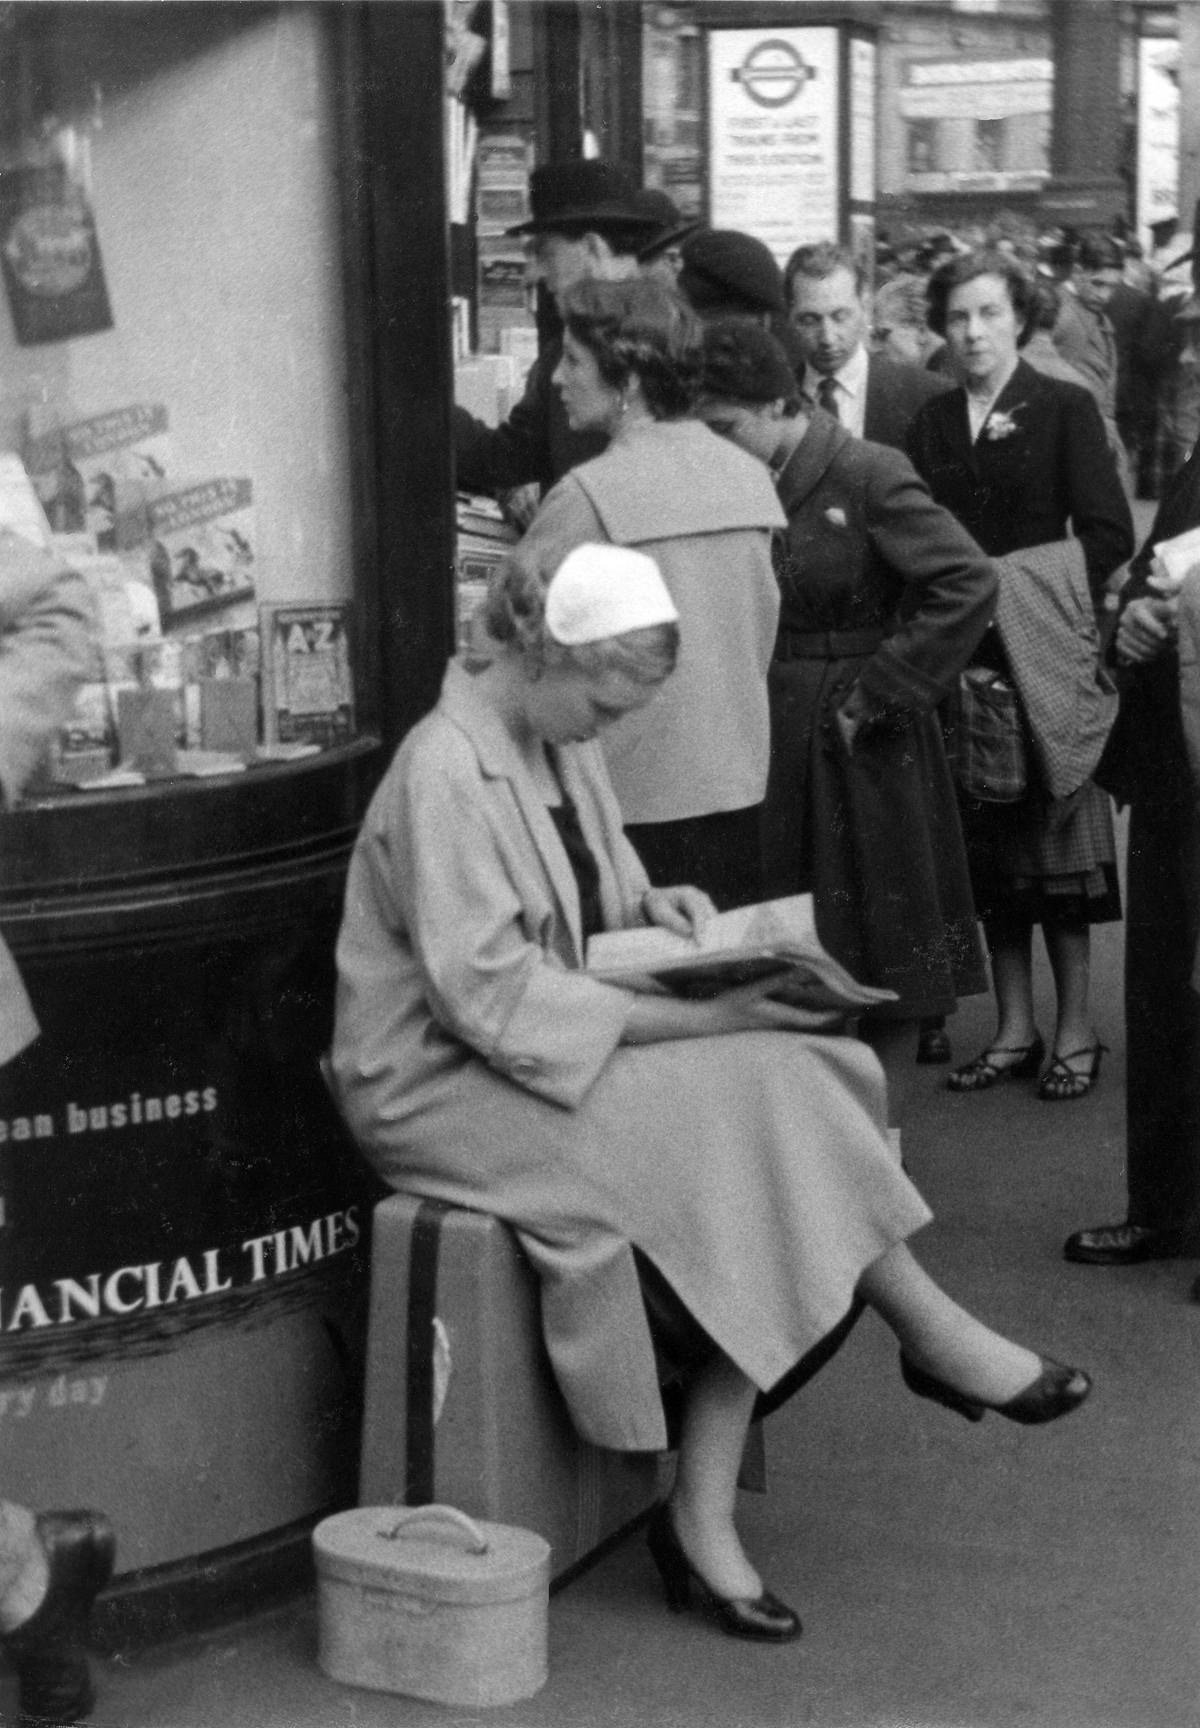 Street Life of London in the Summer of 1954 Through These Fascinating Vintage Photos